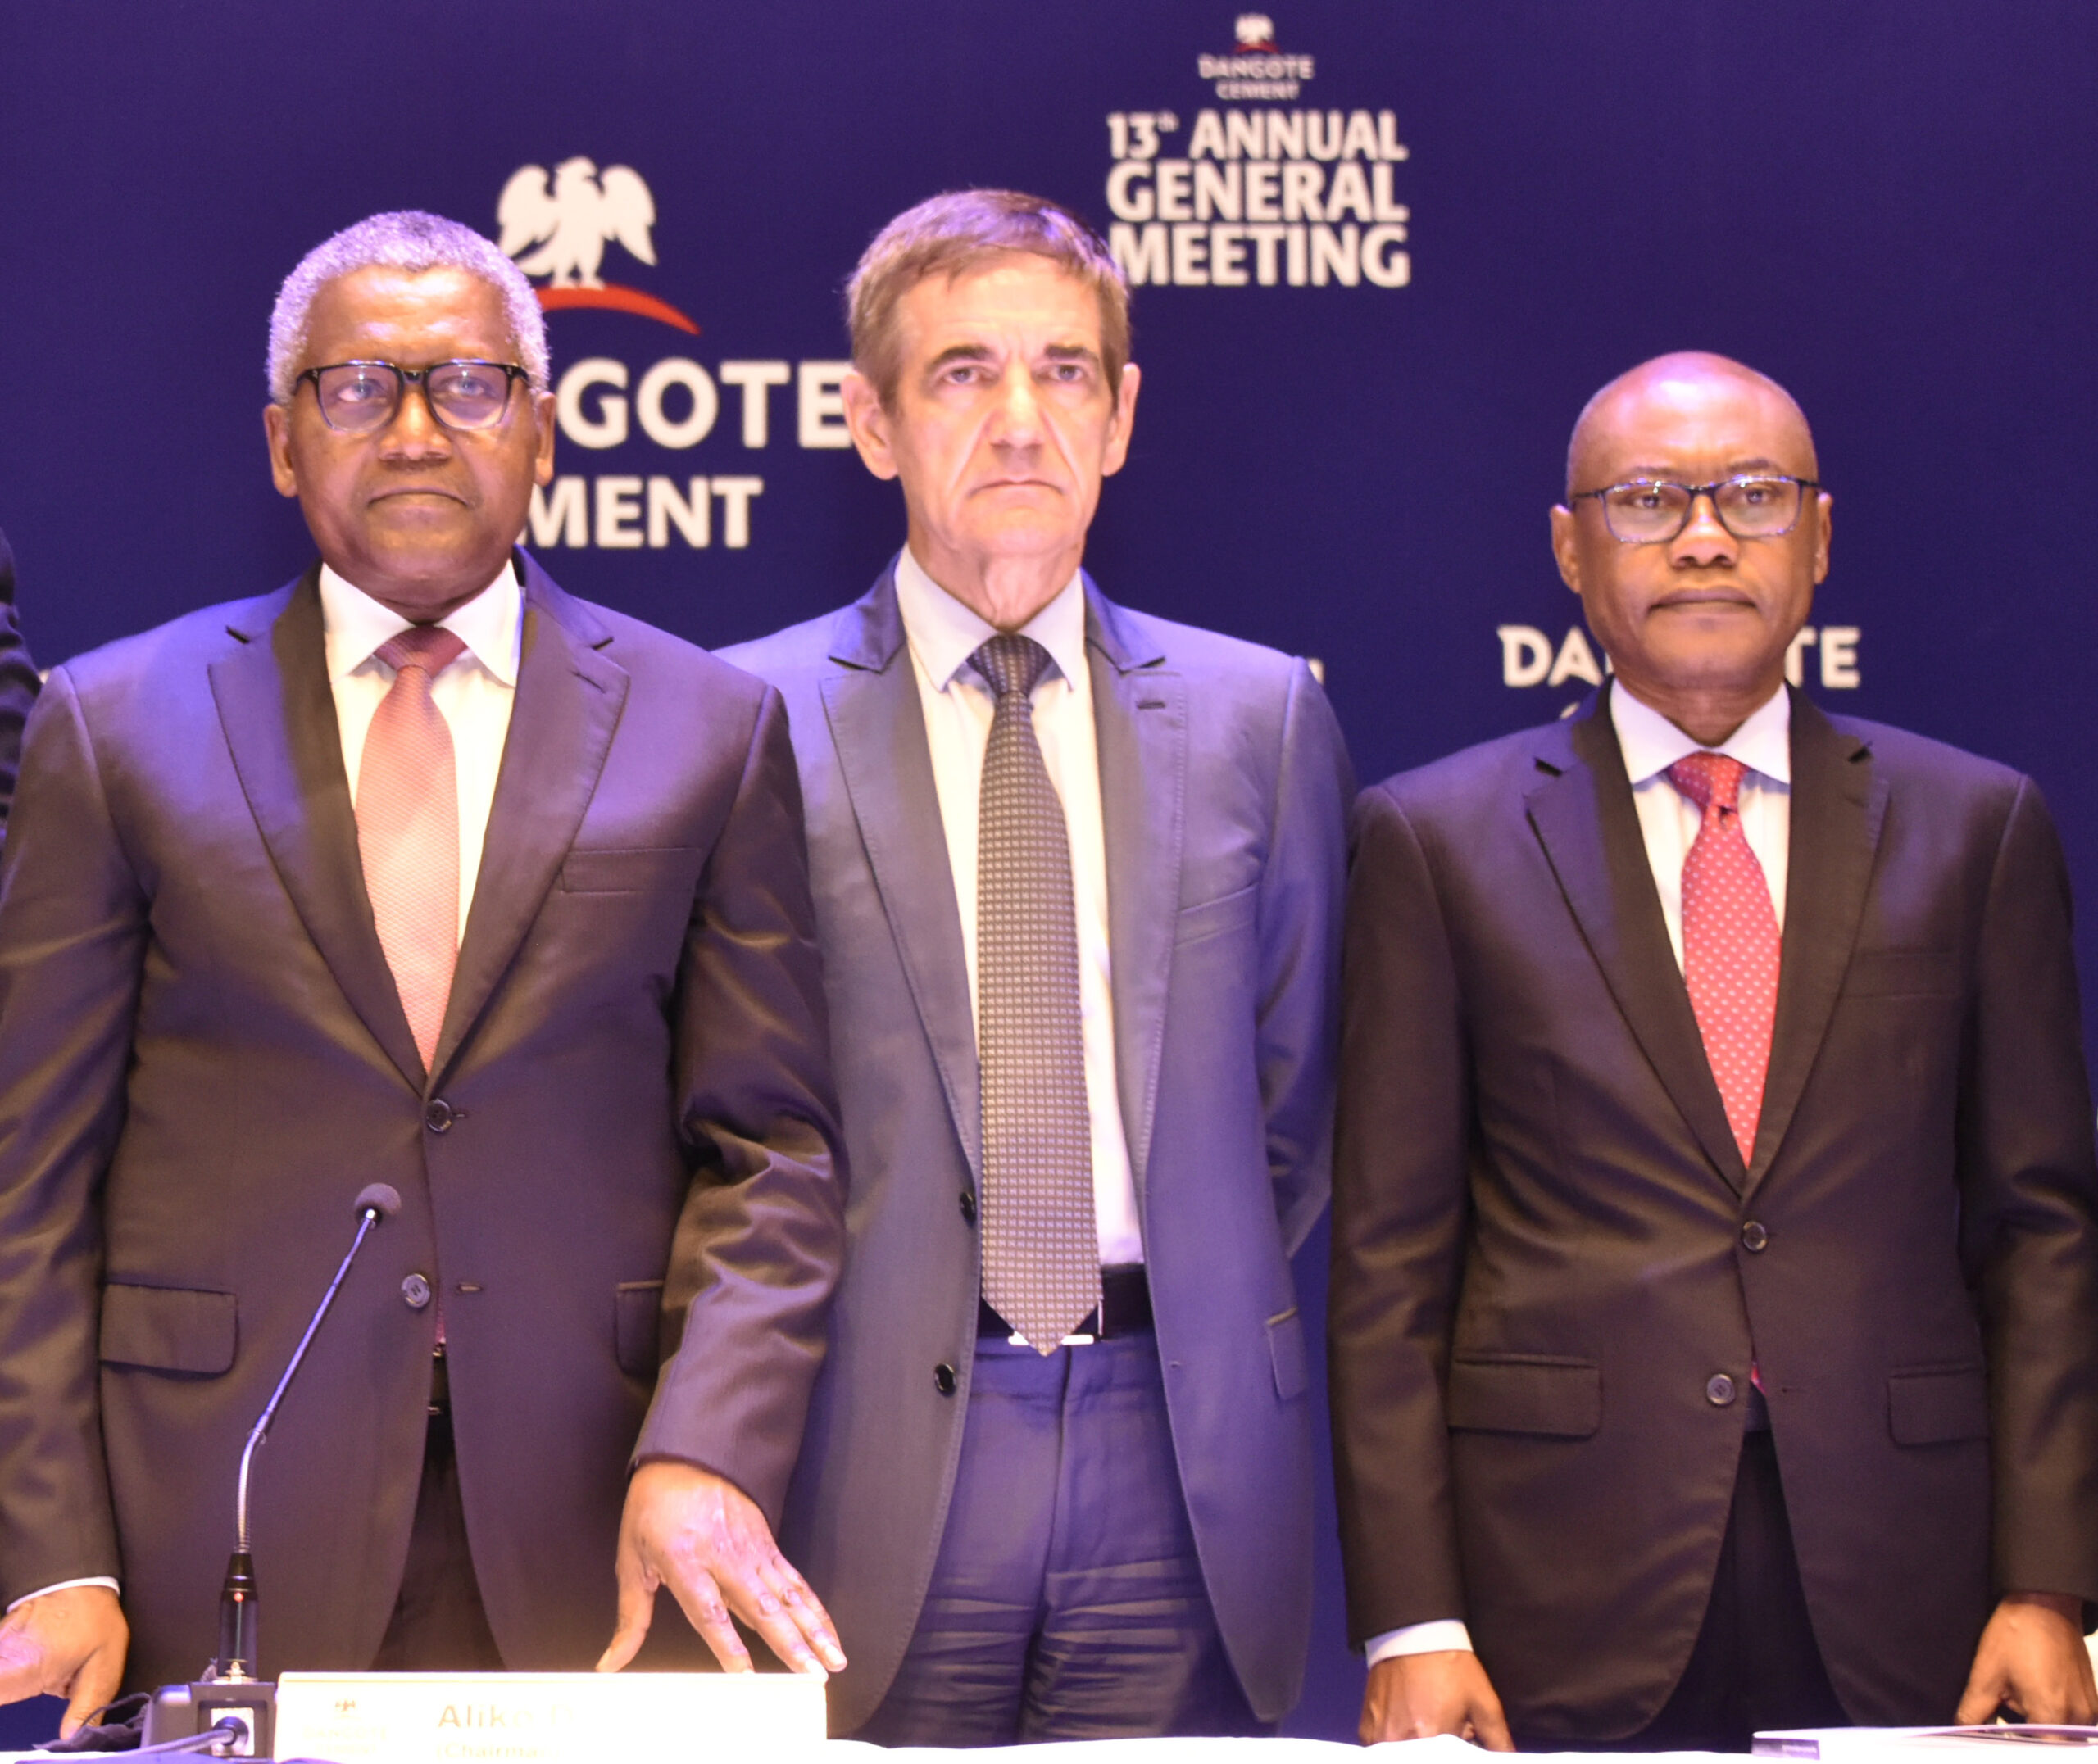 Dangote Cement Shareholders up dividend by 25% to N20 per share